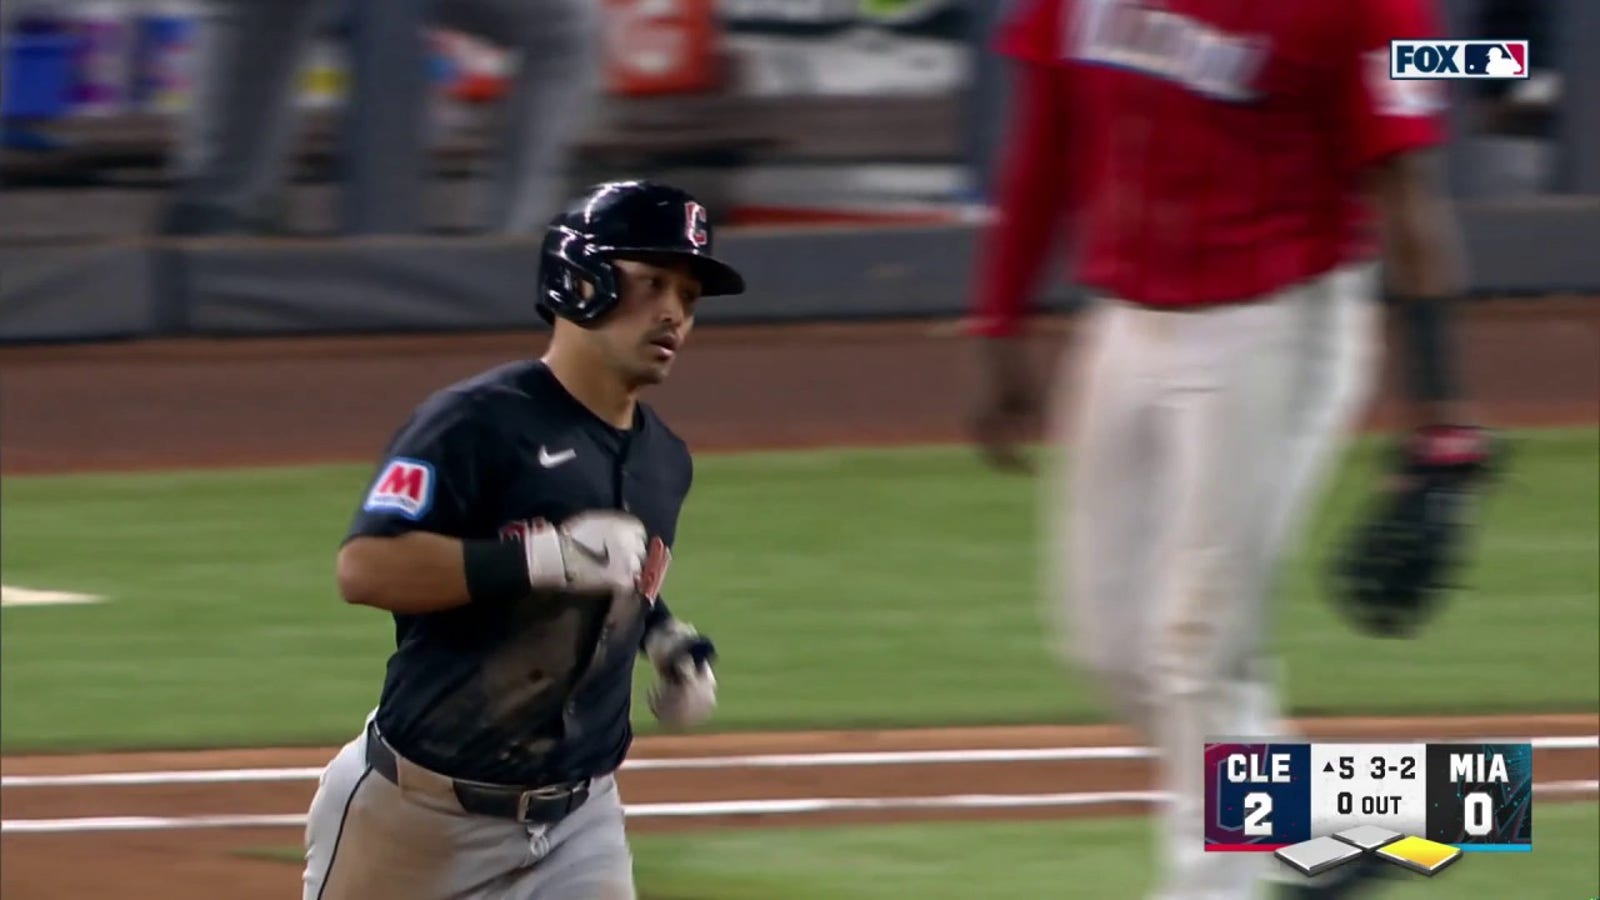 Guardians' Steven Kwan unleashes a two-run home run to take a 4-0 lead over the Marlins